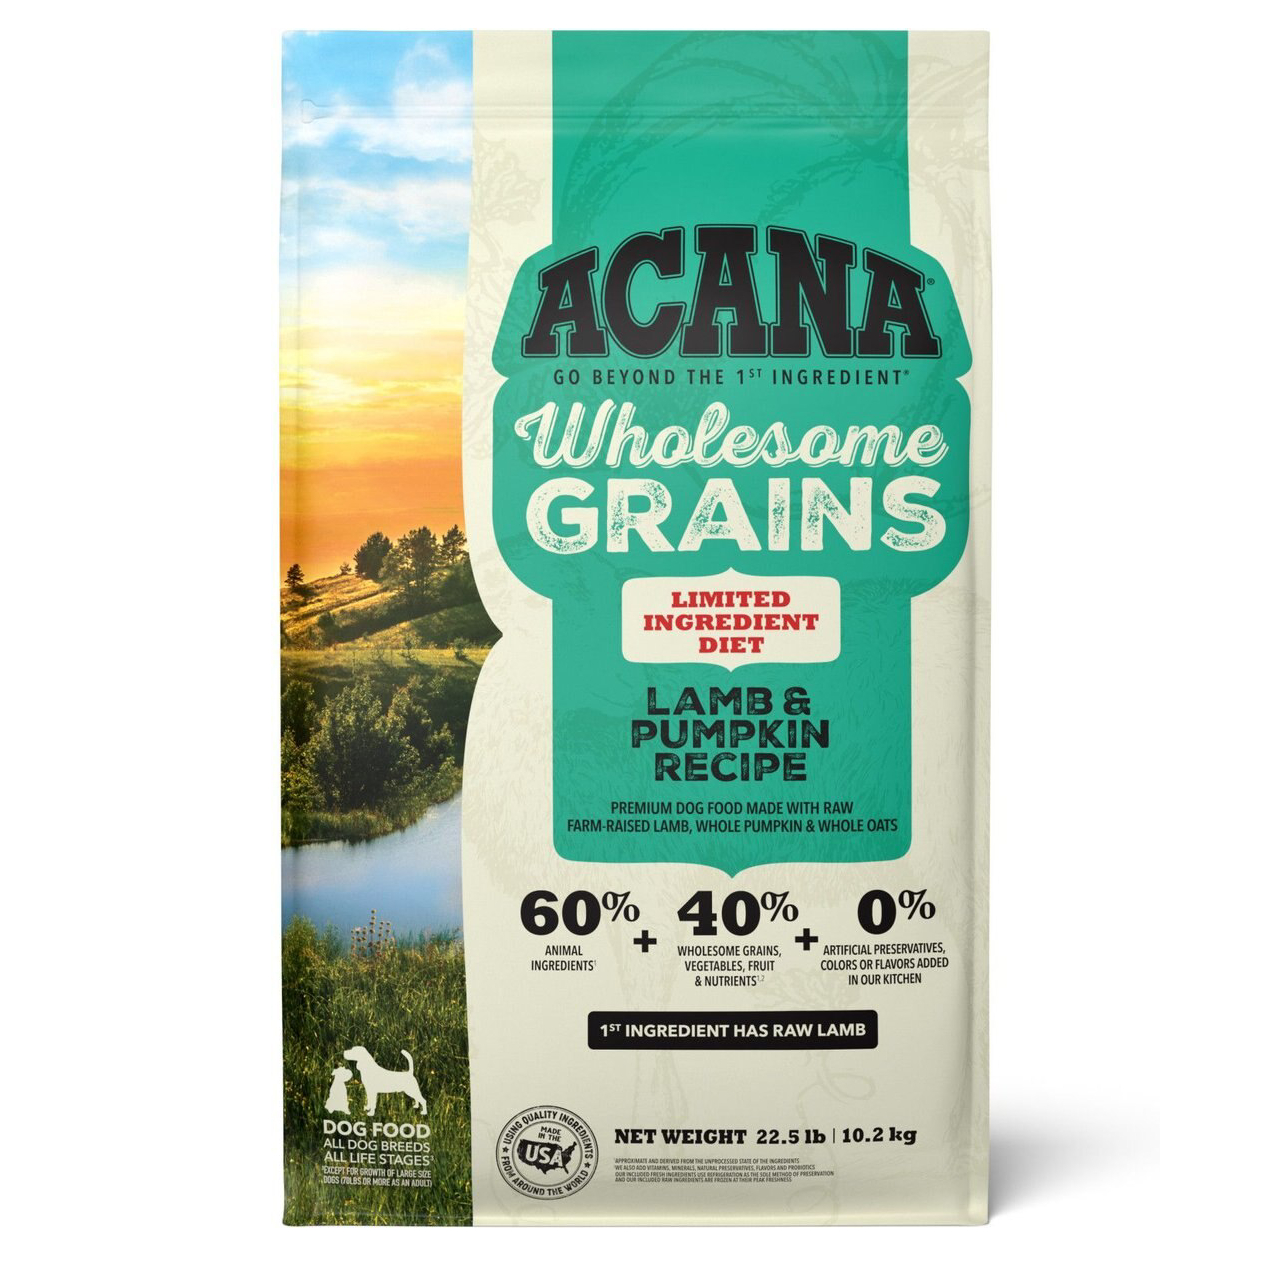 ACANA Wholesome Grains Limited Ingredient Diet Dry Dog Food